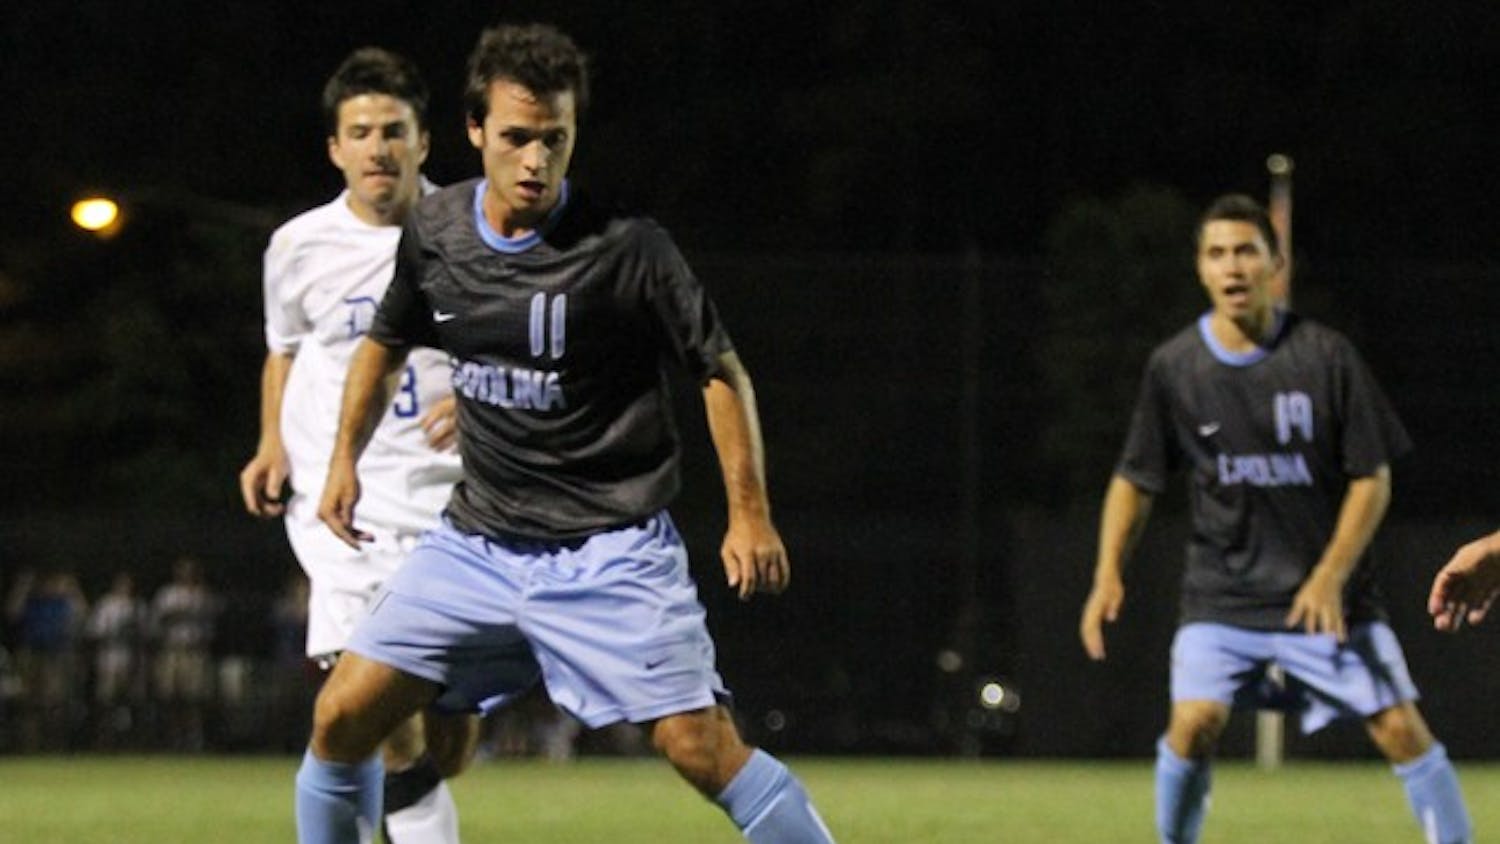 Bruno Castro controls the ball against Duke on Friday. The freshman’s 79th-minute goal gave UNC a 1-0 win. It was his first as a Tar Heel.